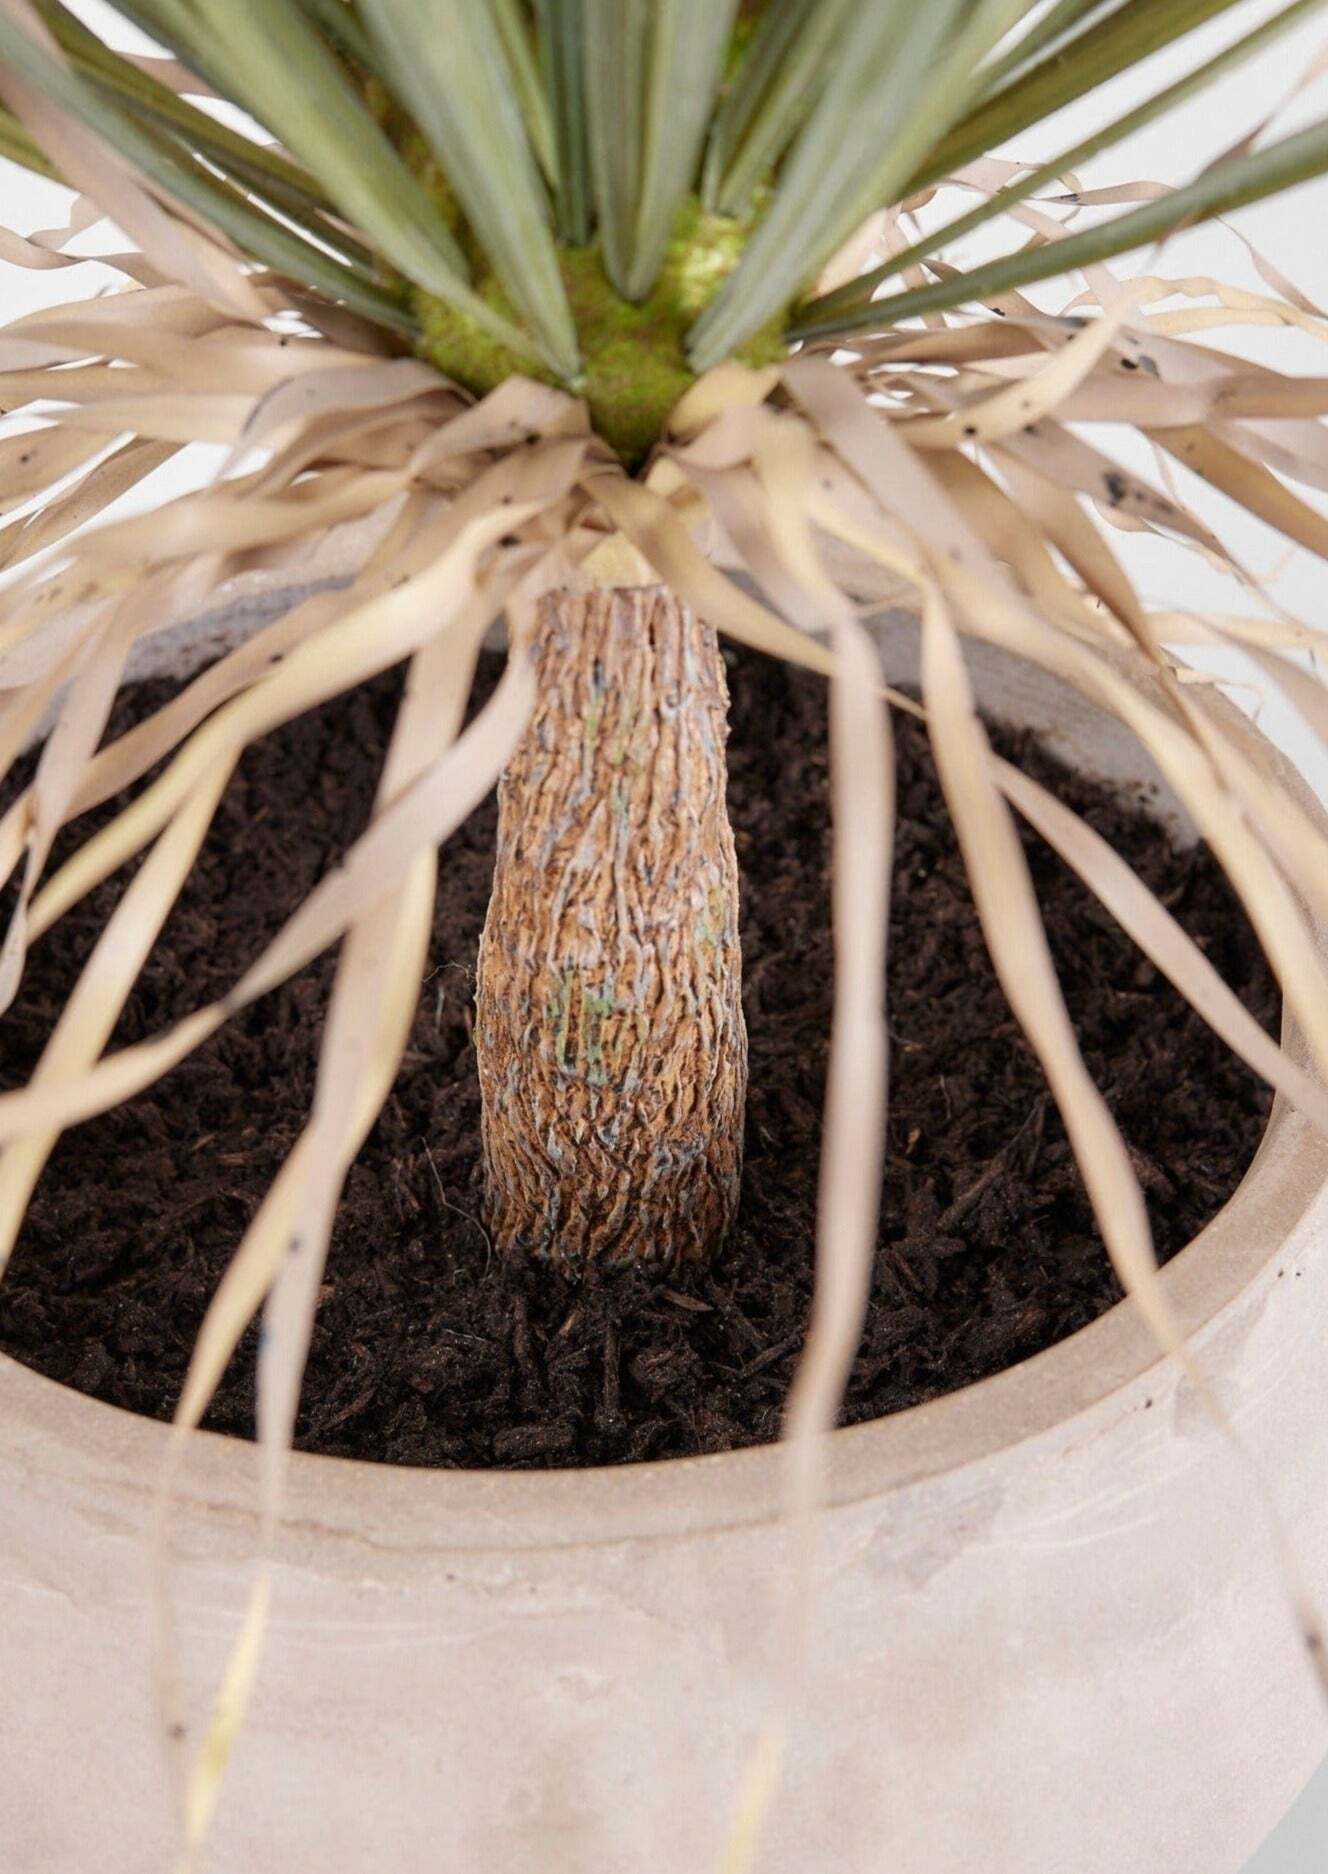 Faux Potted Palm Tree Plant in Cement Planter - 40